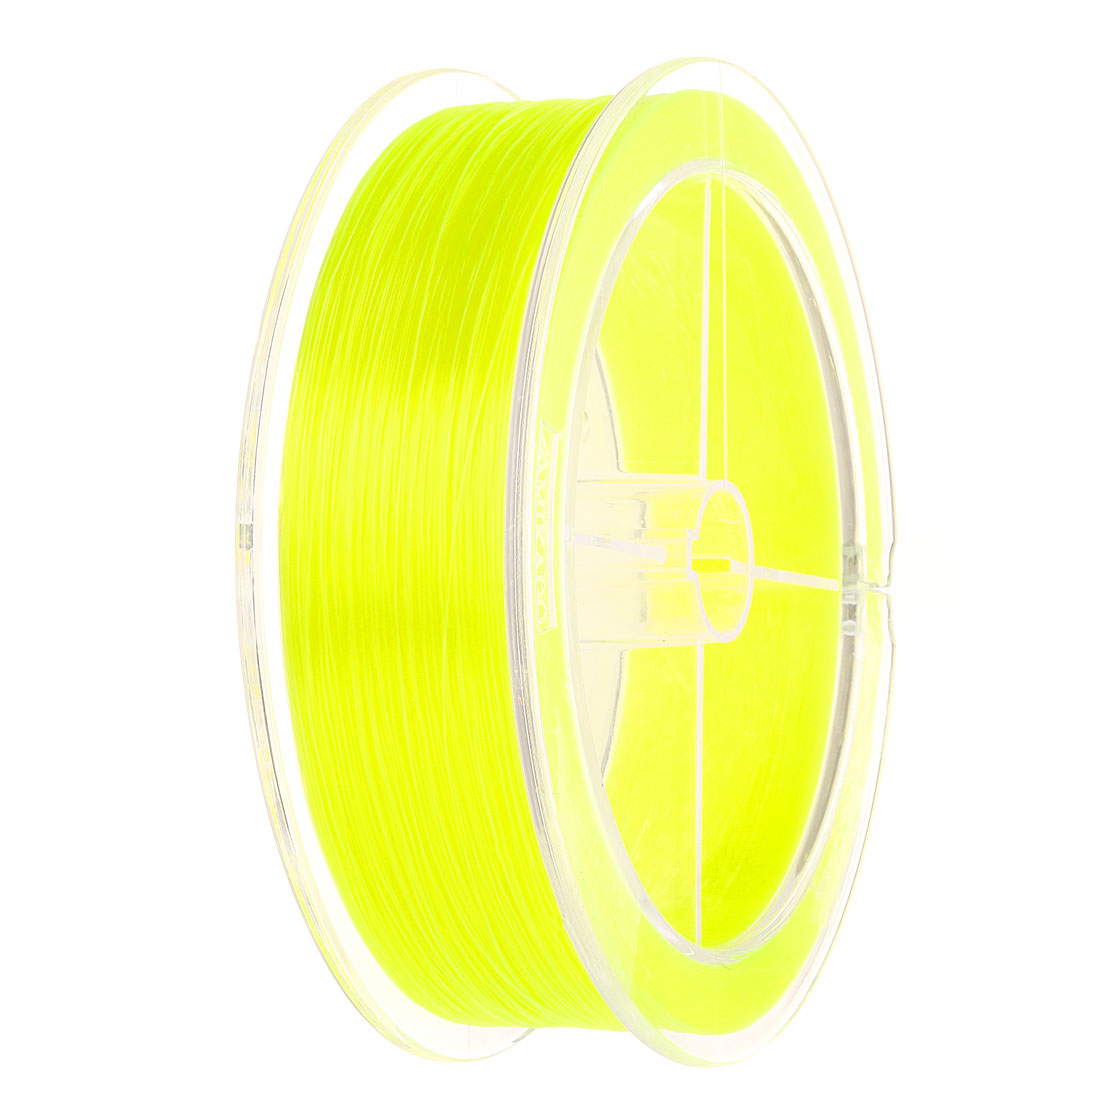 Gamakatsu Super G-Line Nymph Fluo yellow, Nymph Leaders, Leader Materials, Fly Lines